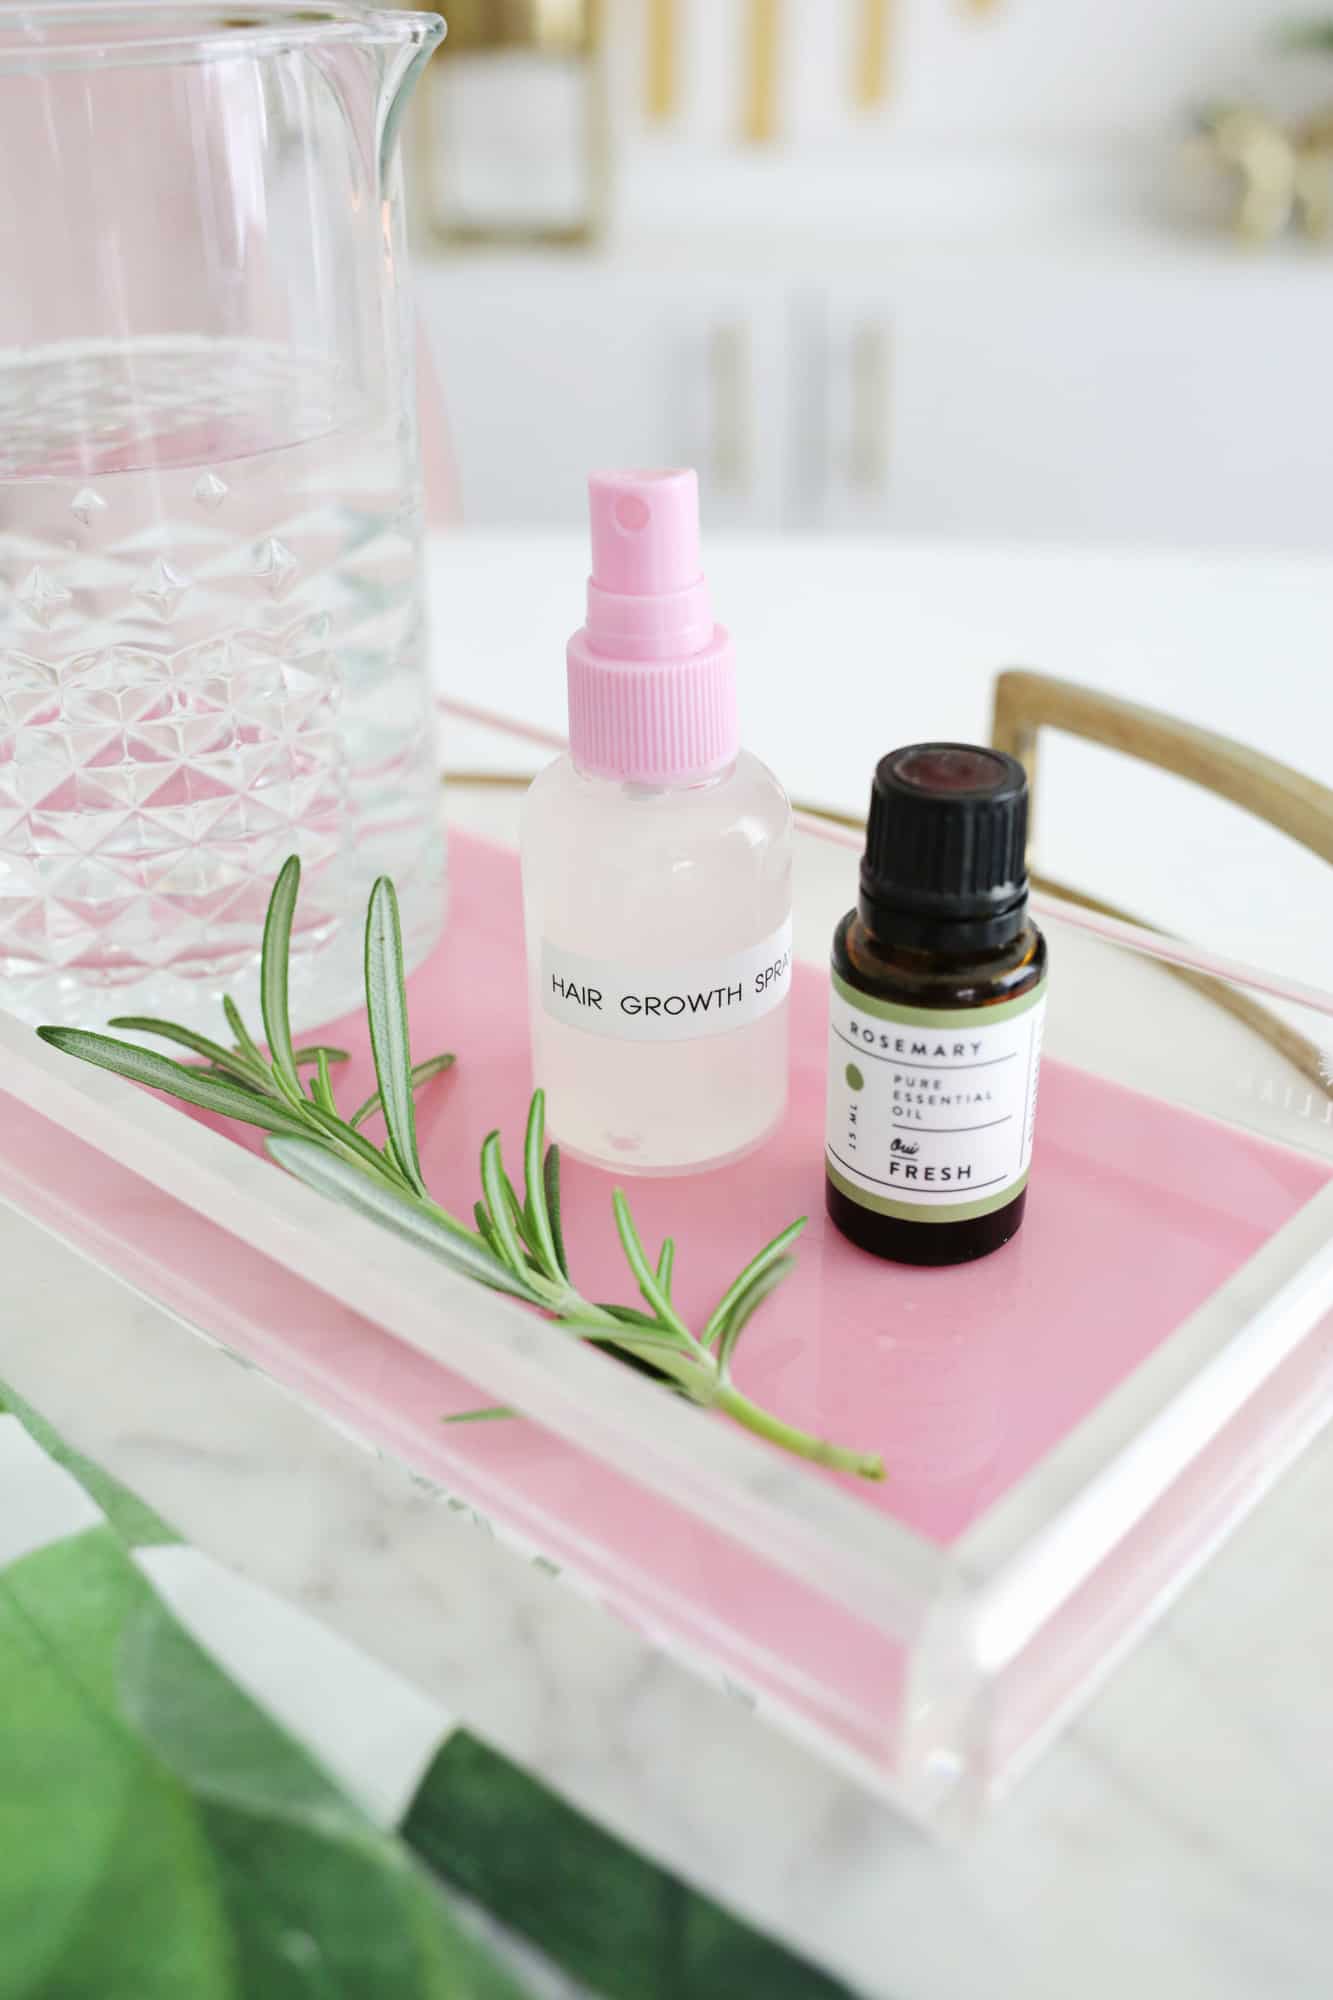 a tray with a glass of water, a spray bottle labeled hair growth spray, and a bottle of Rosemary essential oil on it